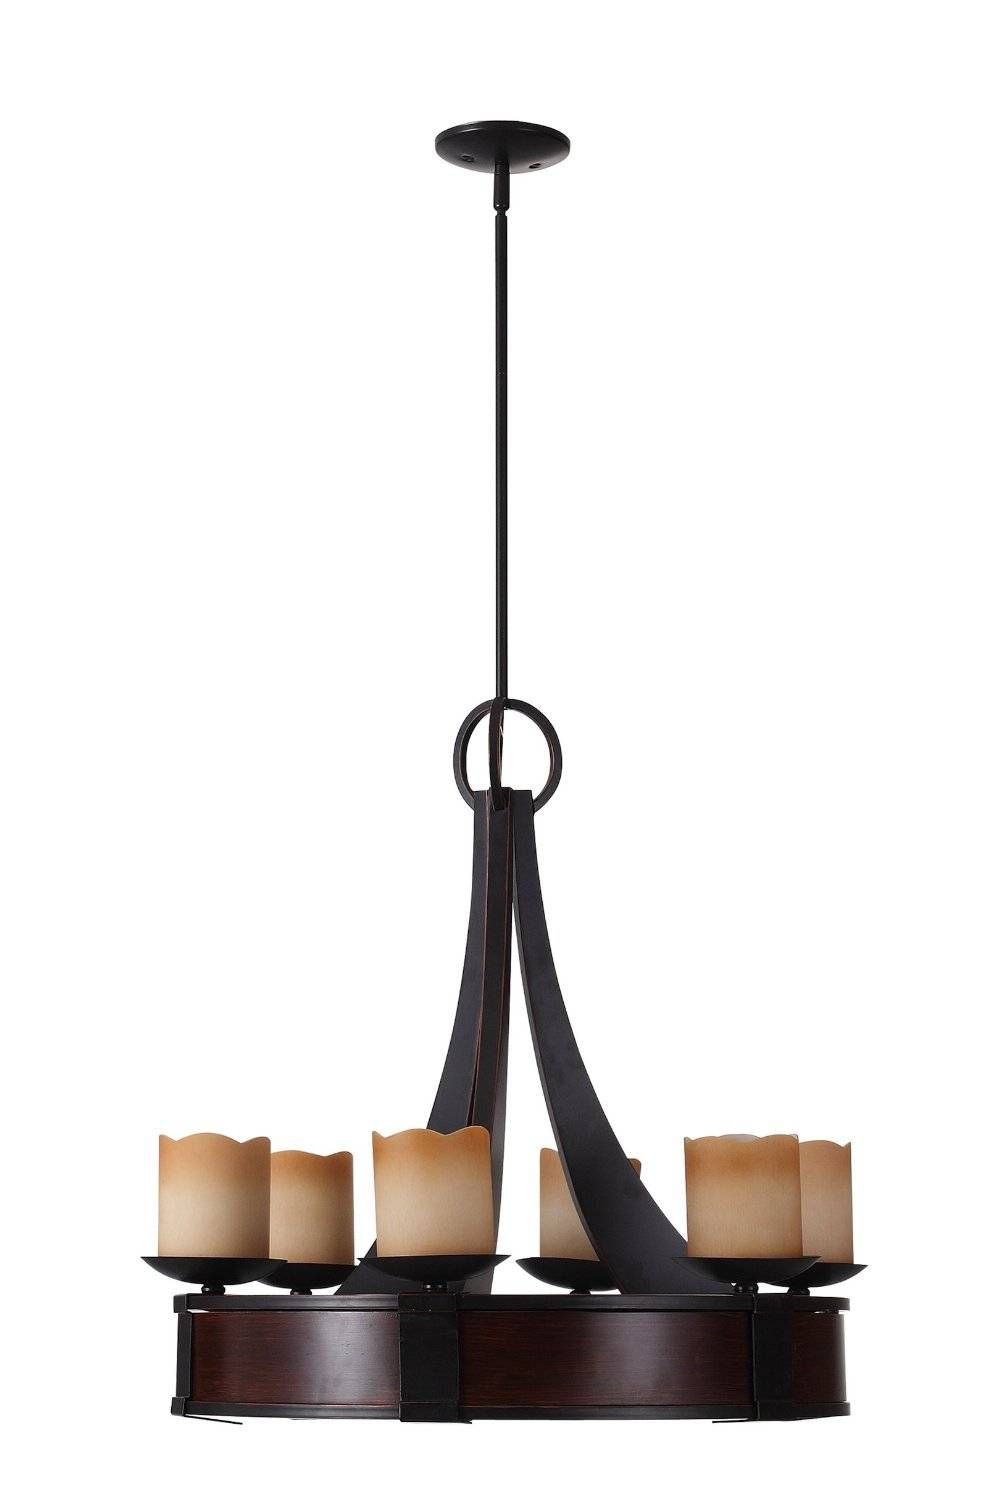 12 Best Rustic Wood And Metal Chandeliers | Qosy With Regard To Wrought Iron Pendant Lights Australia (View 8 of 15)